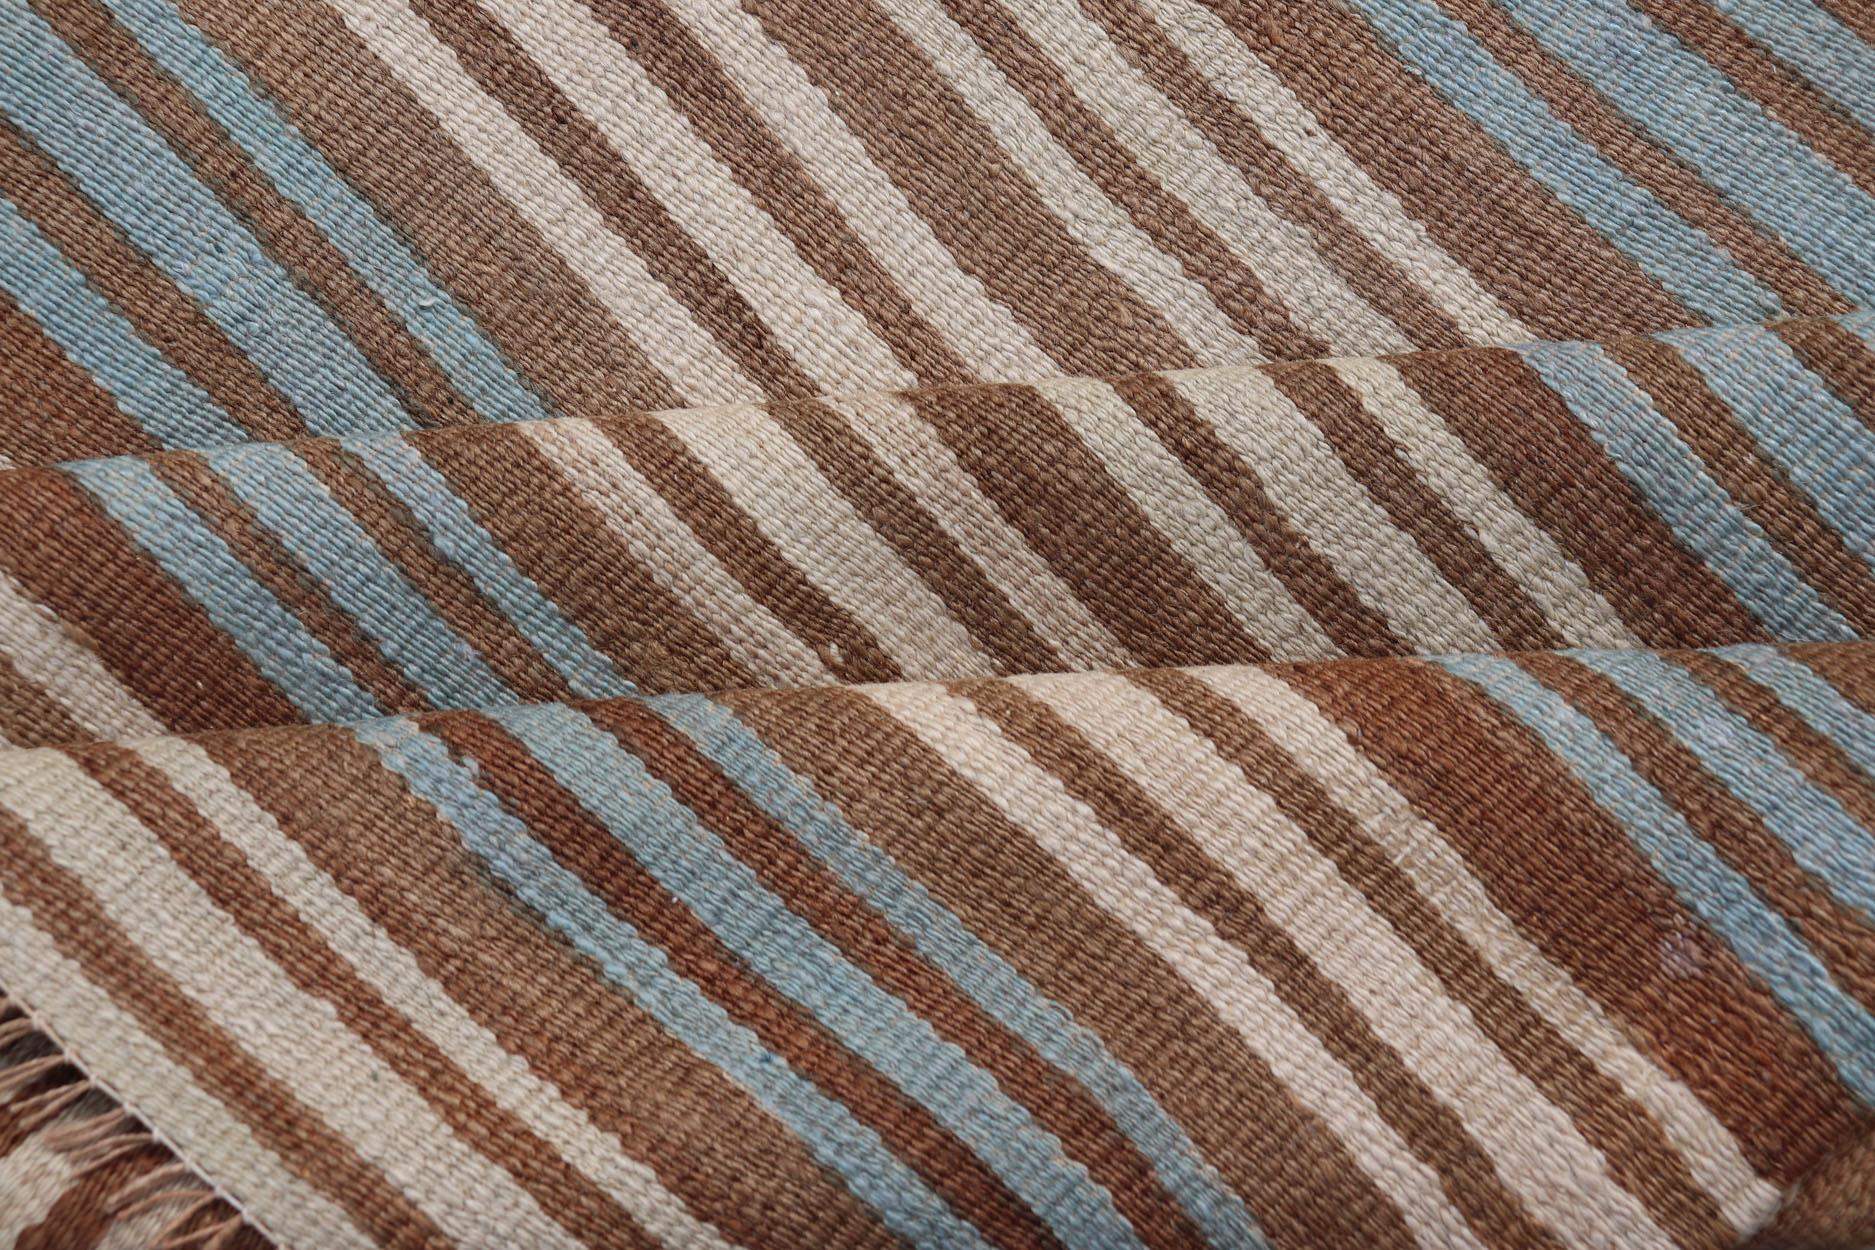 Vintage Hand Woven Turkish Kilim with Stripes in Brown, Cream and Light Blue For Sale 5